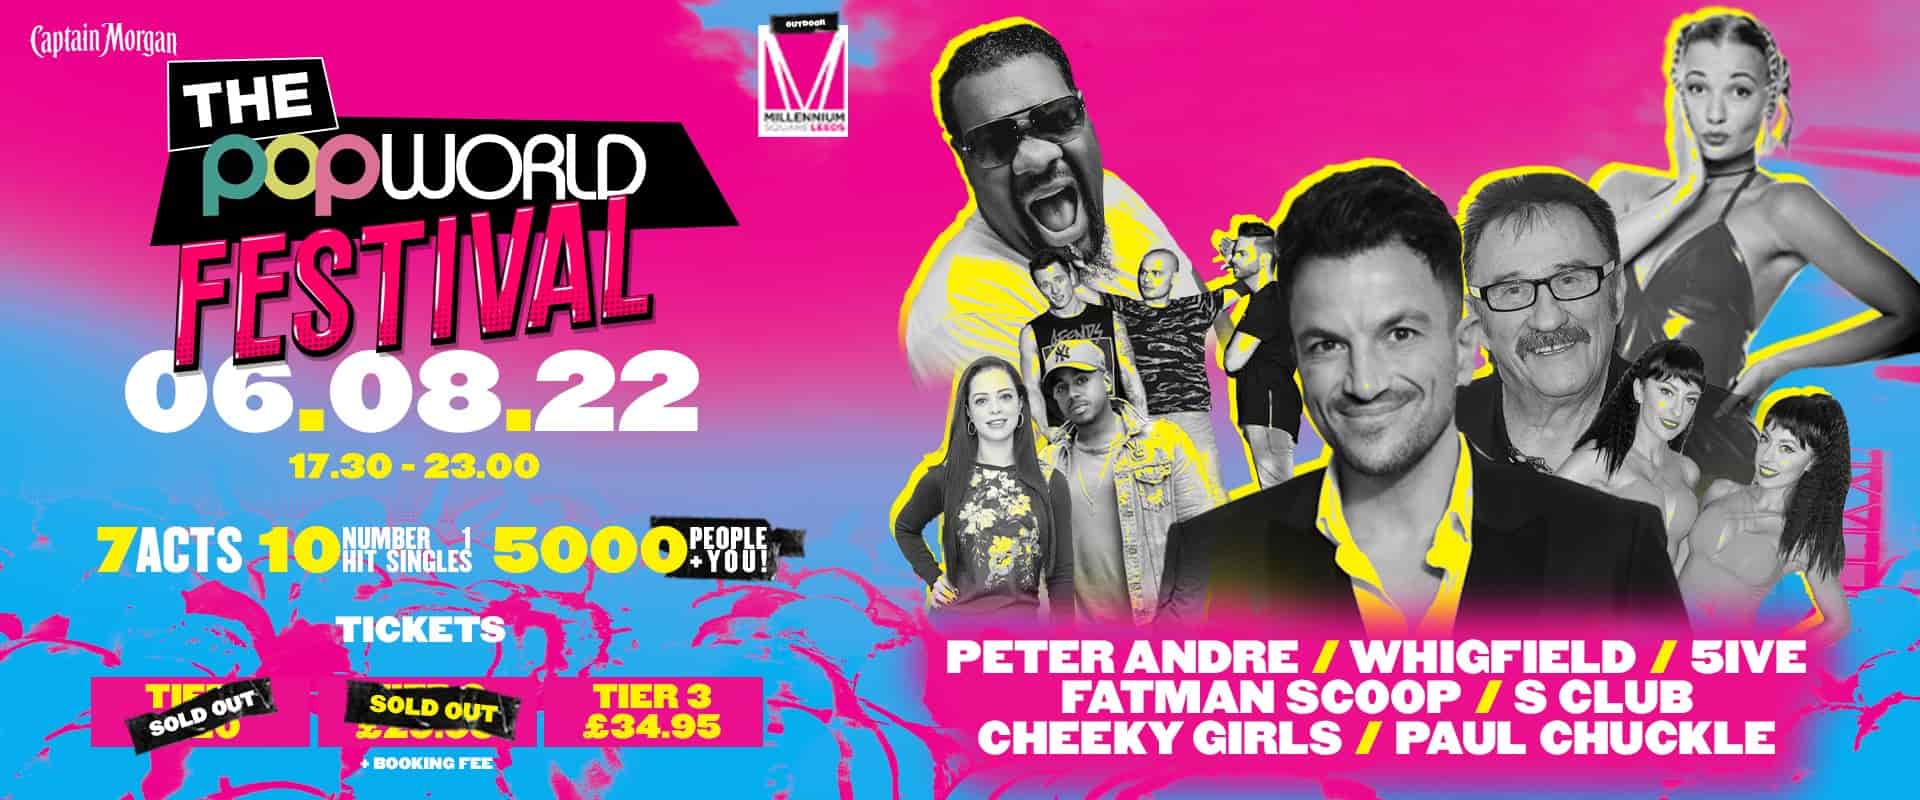 Popworld Festival at Leeds Millennium Square on the 6th of August